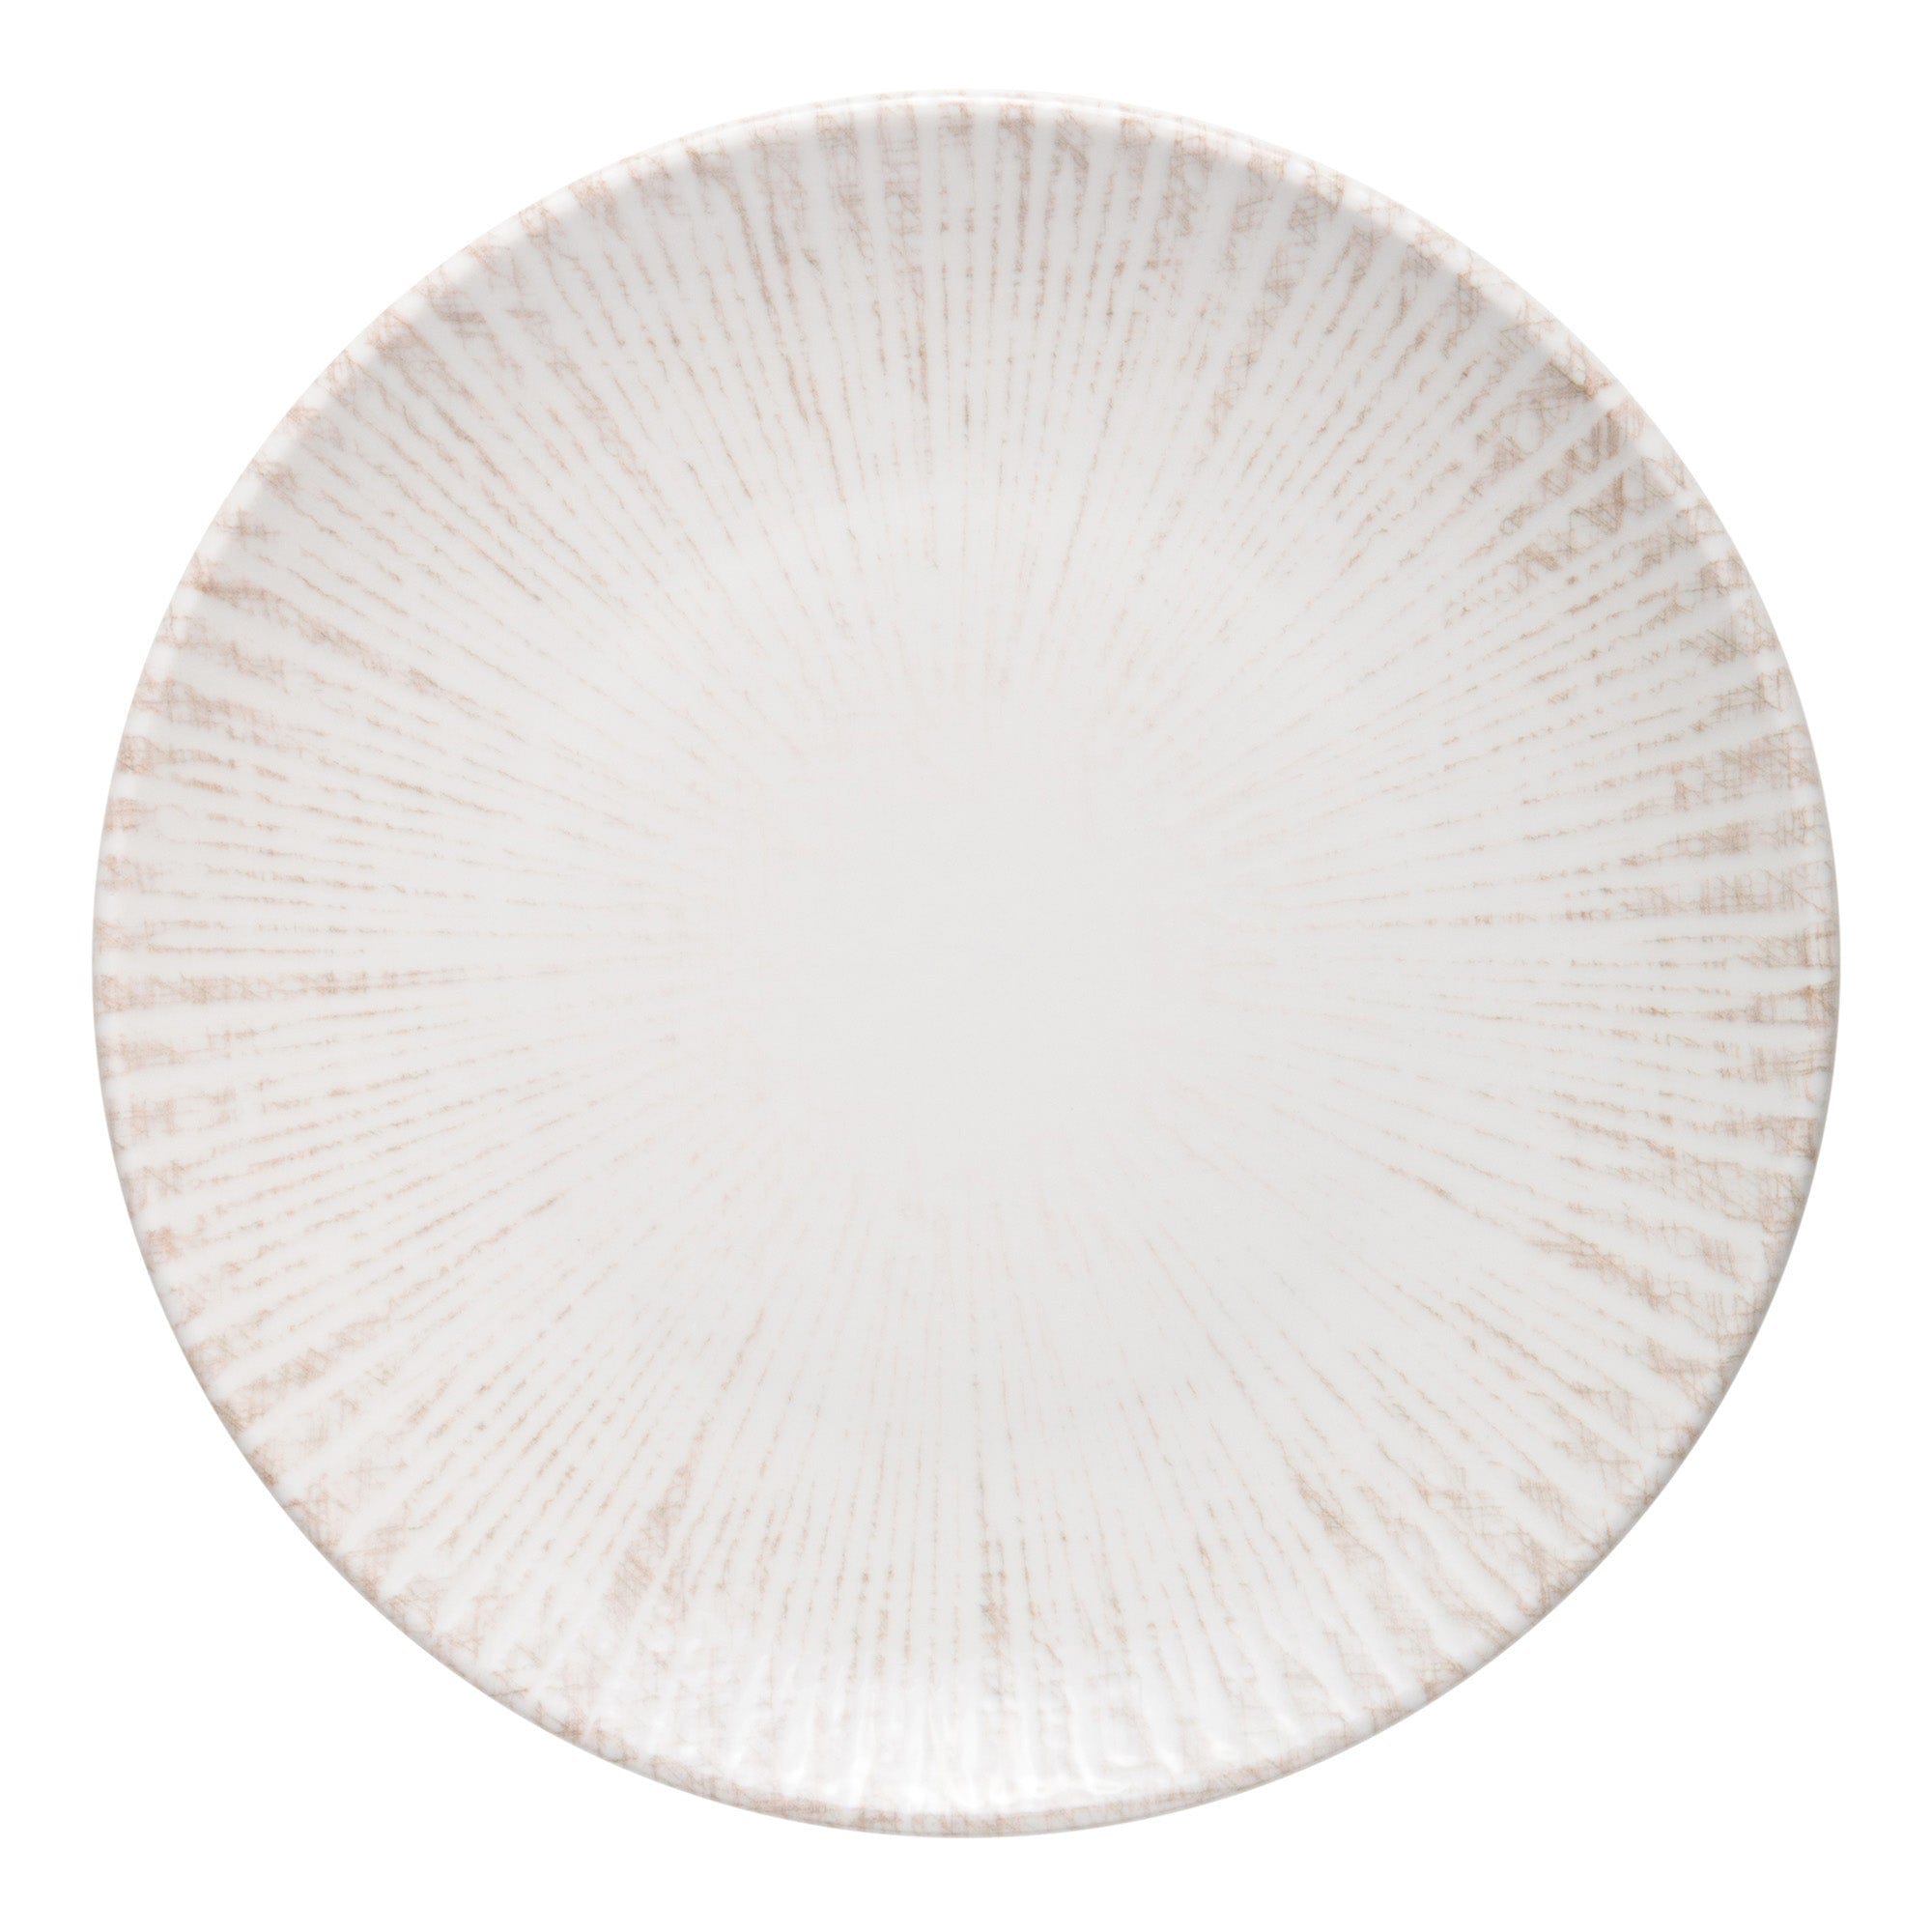 Ray Porcelain Plate 8.2"